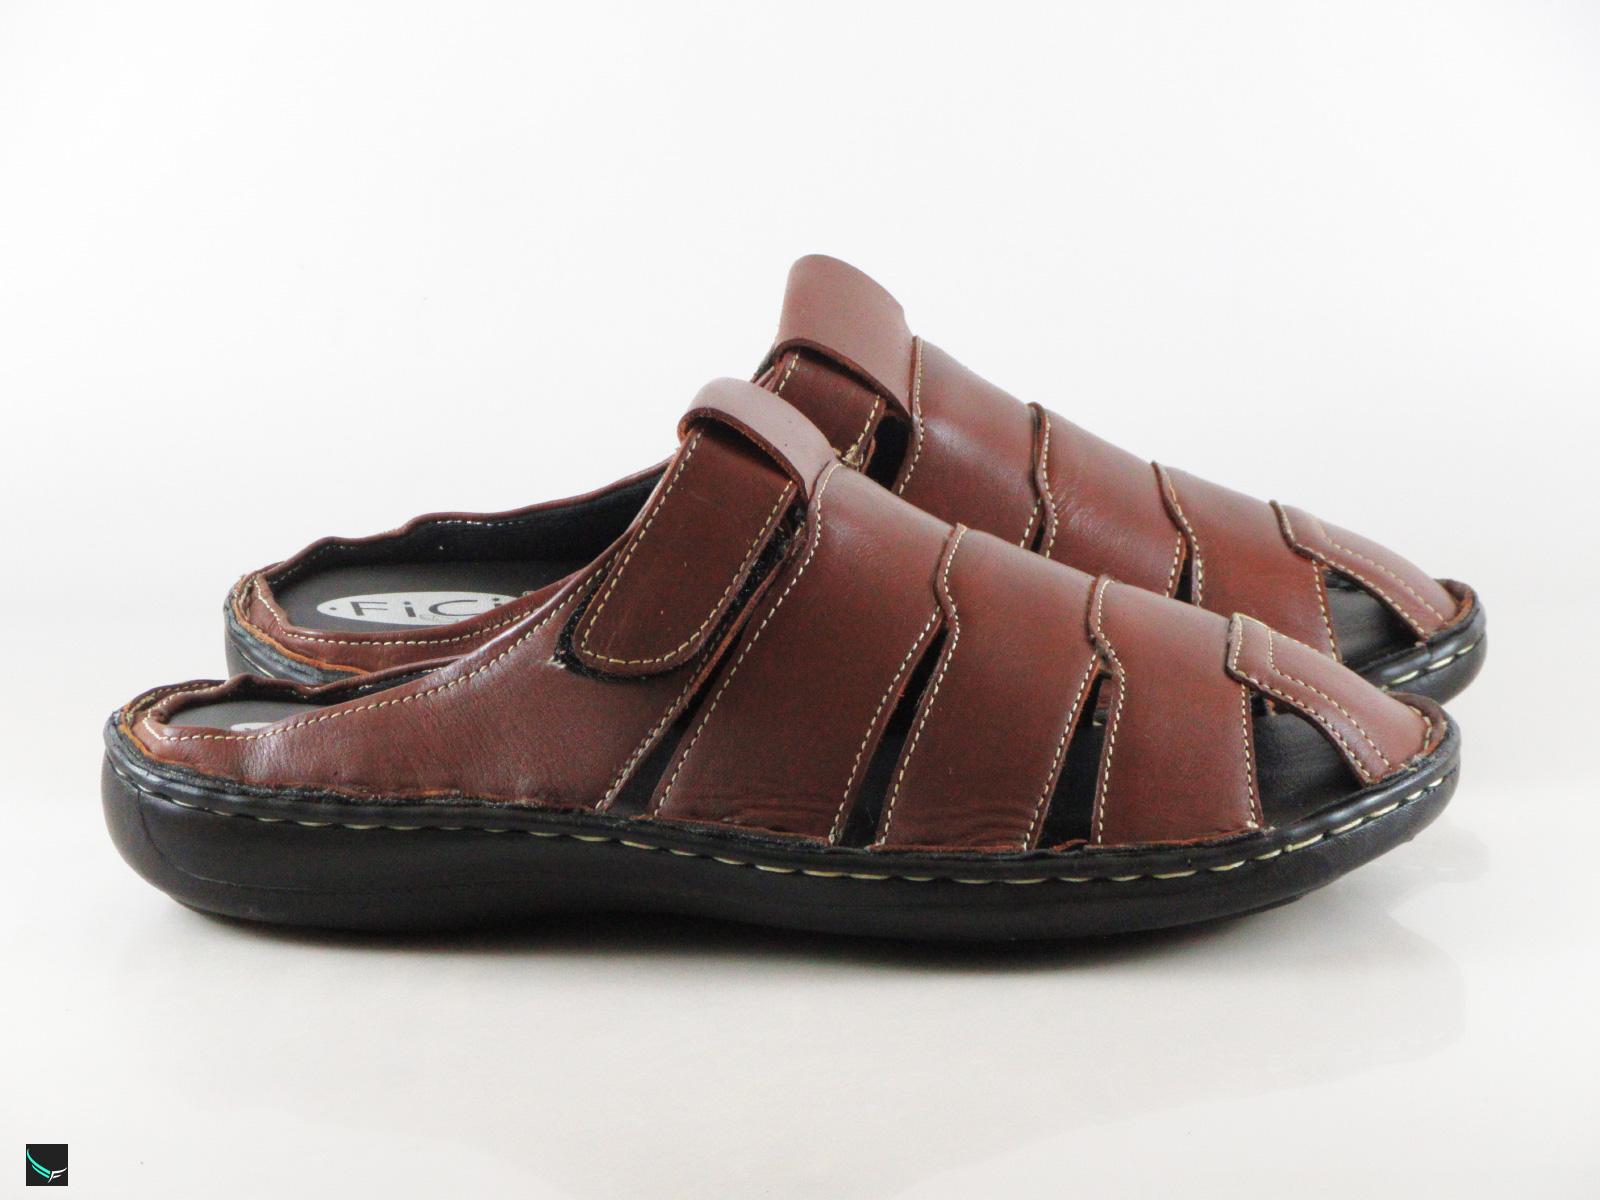 Men's Casual Leather Sandals - 3389 - Leather Collections On Frostfreak.com